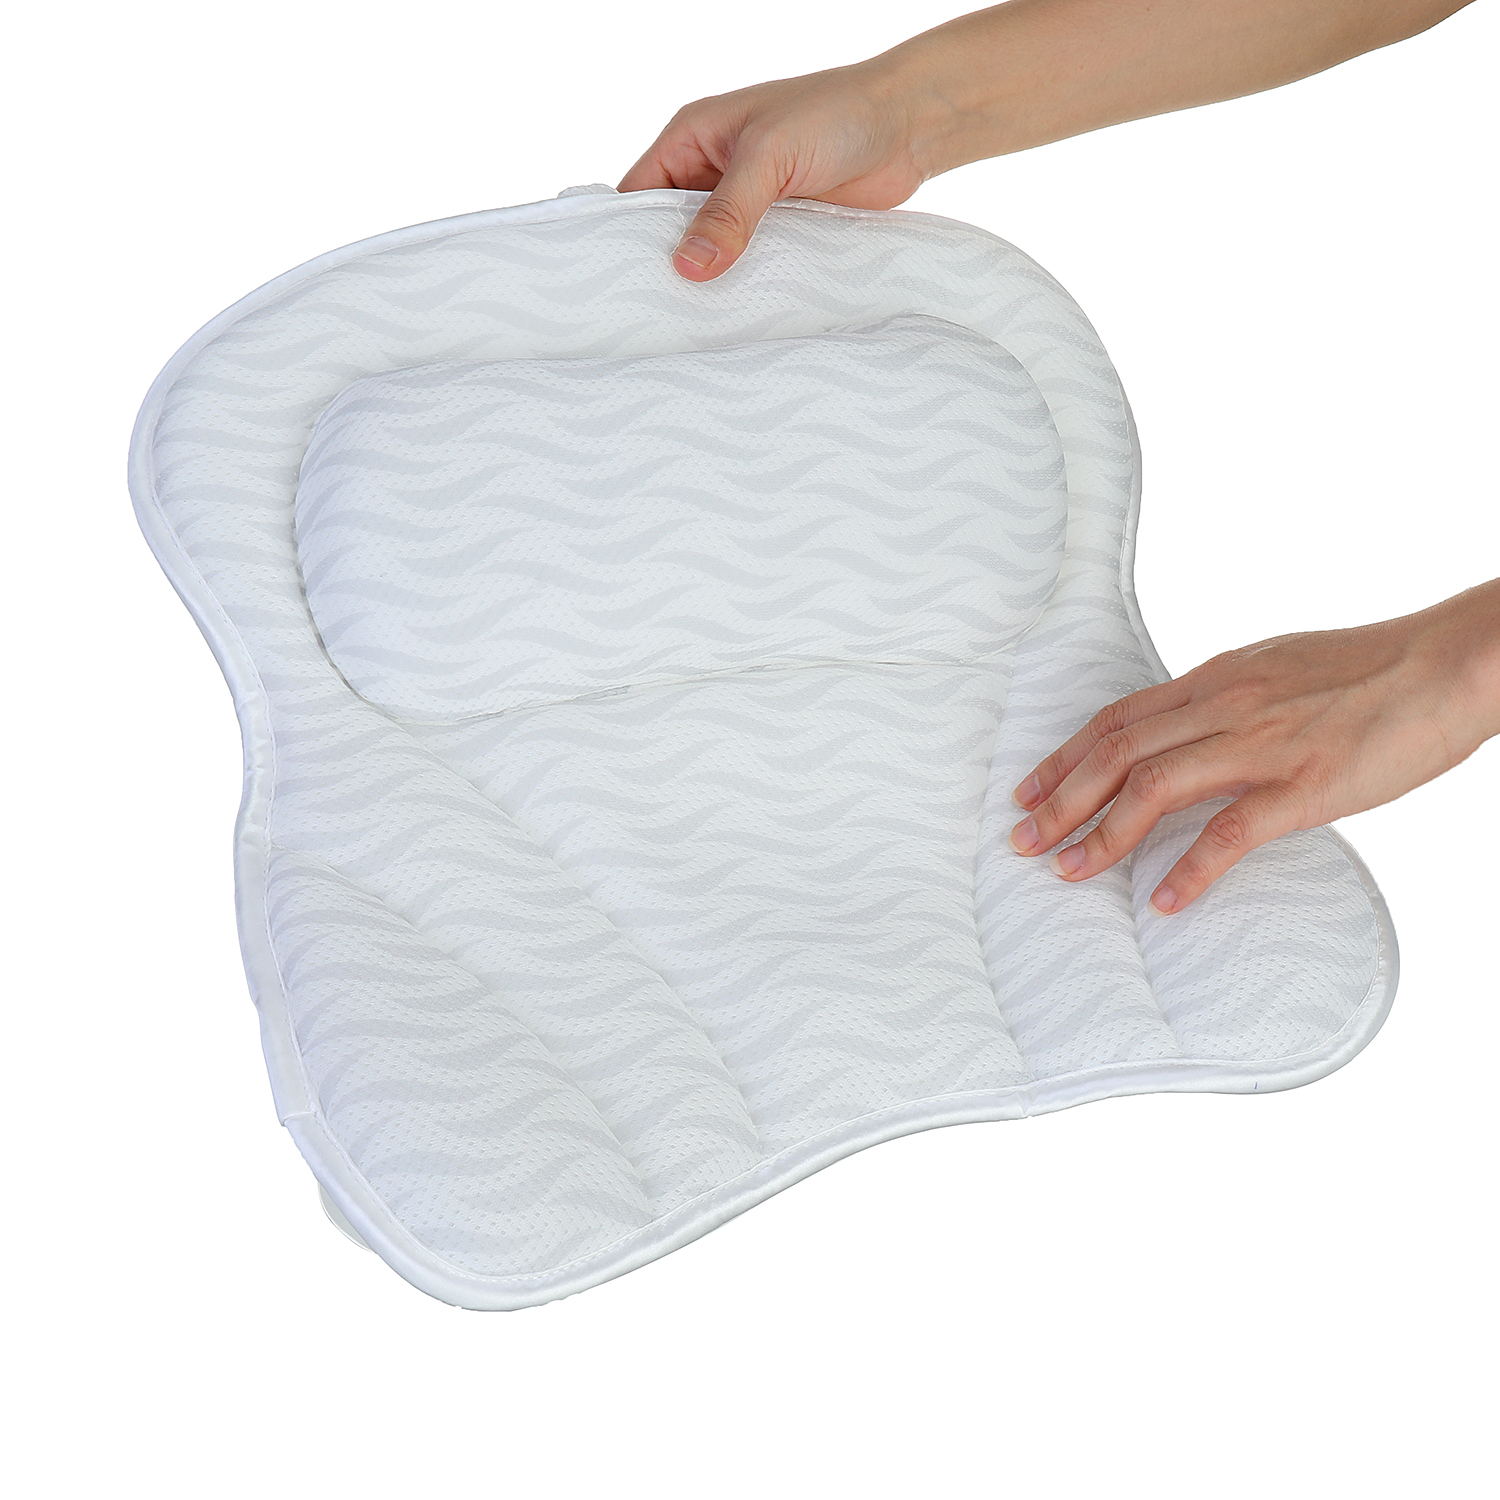 YEERSWAG-Bath-Pillow-Spirity-Ergonomic-with-Neck-and-Back-Support-Comfortable-Bathtub-Pillows-for-Re-1945900-10